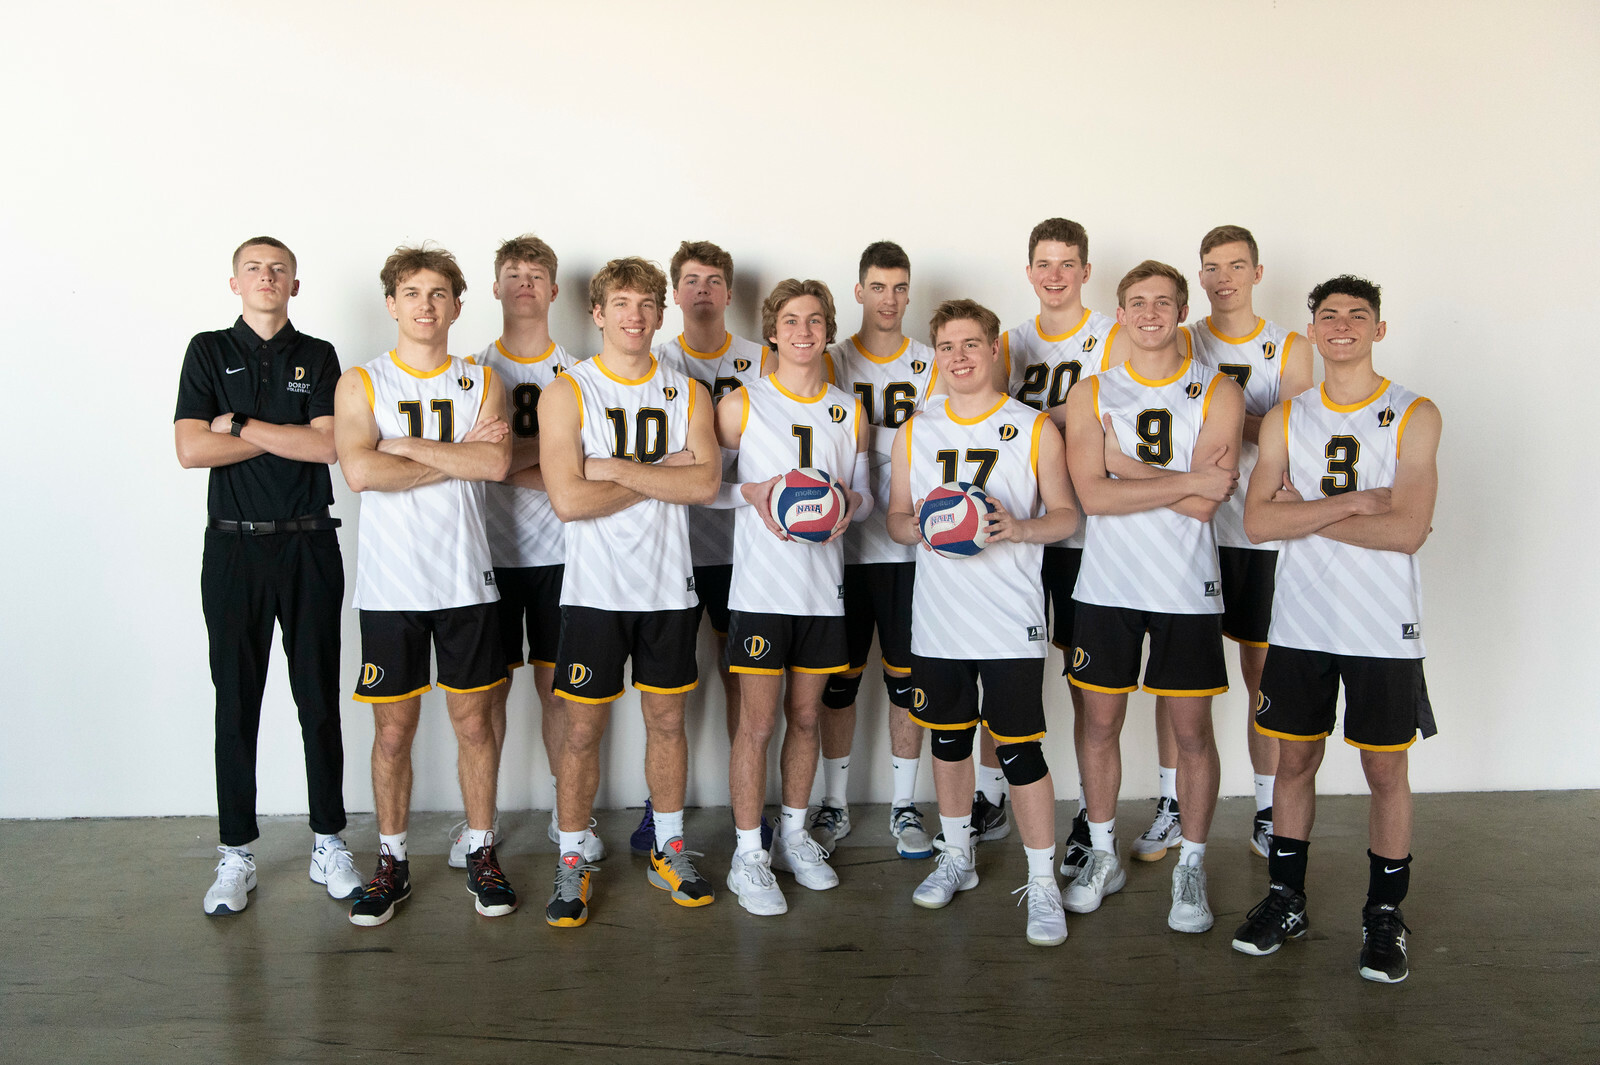 A picture of Dordt University's men's volleyball team